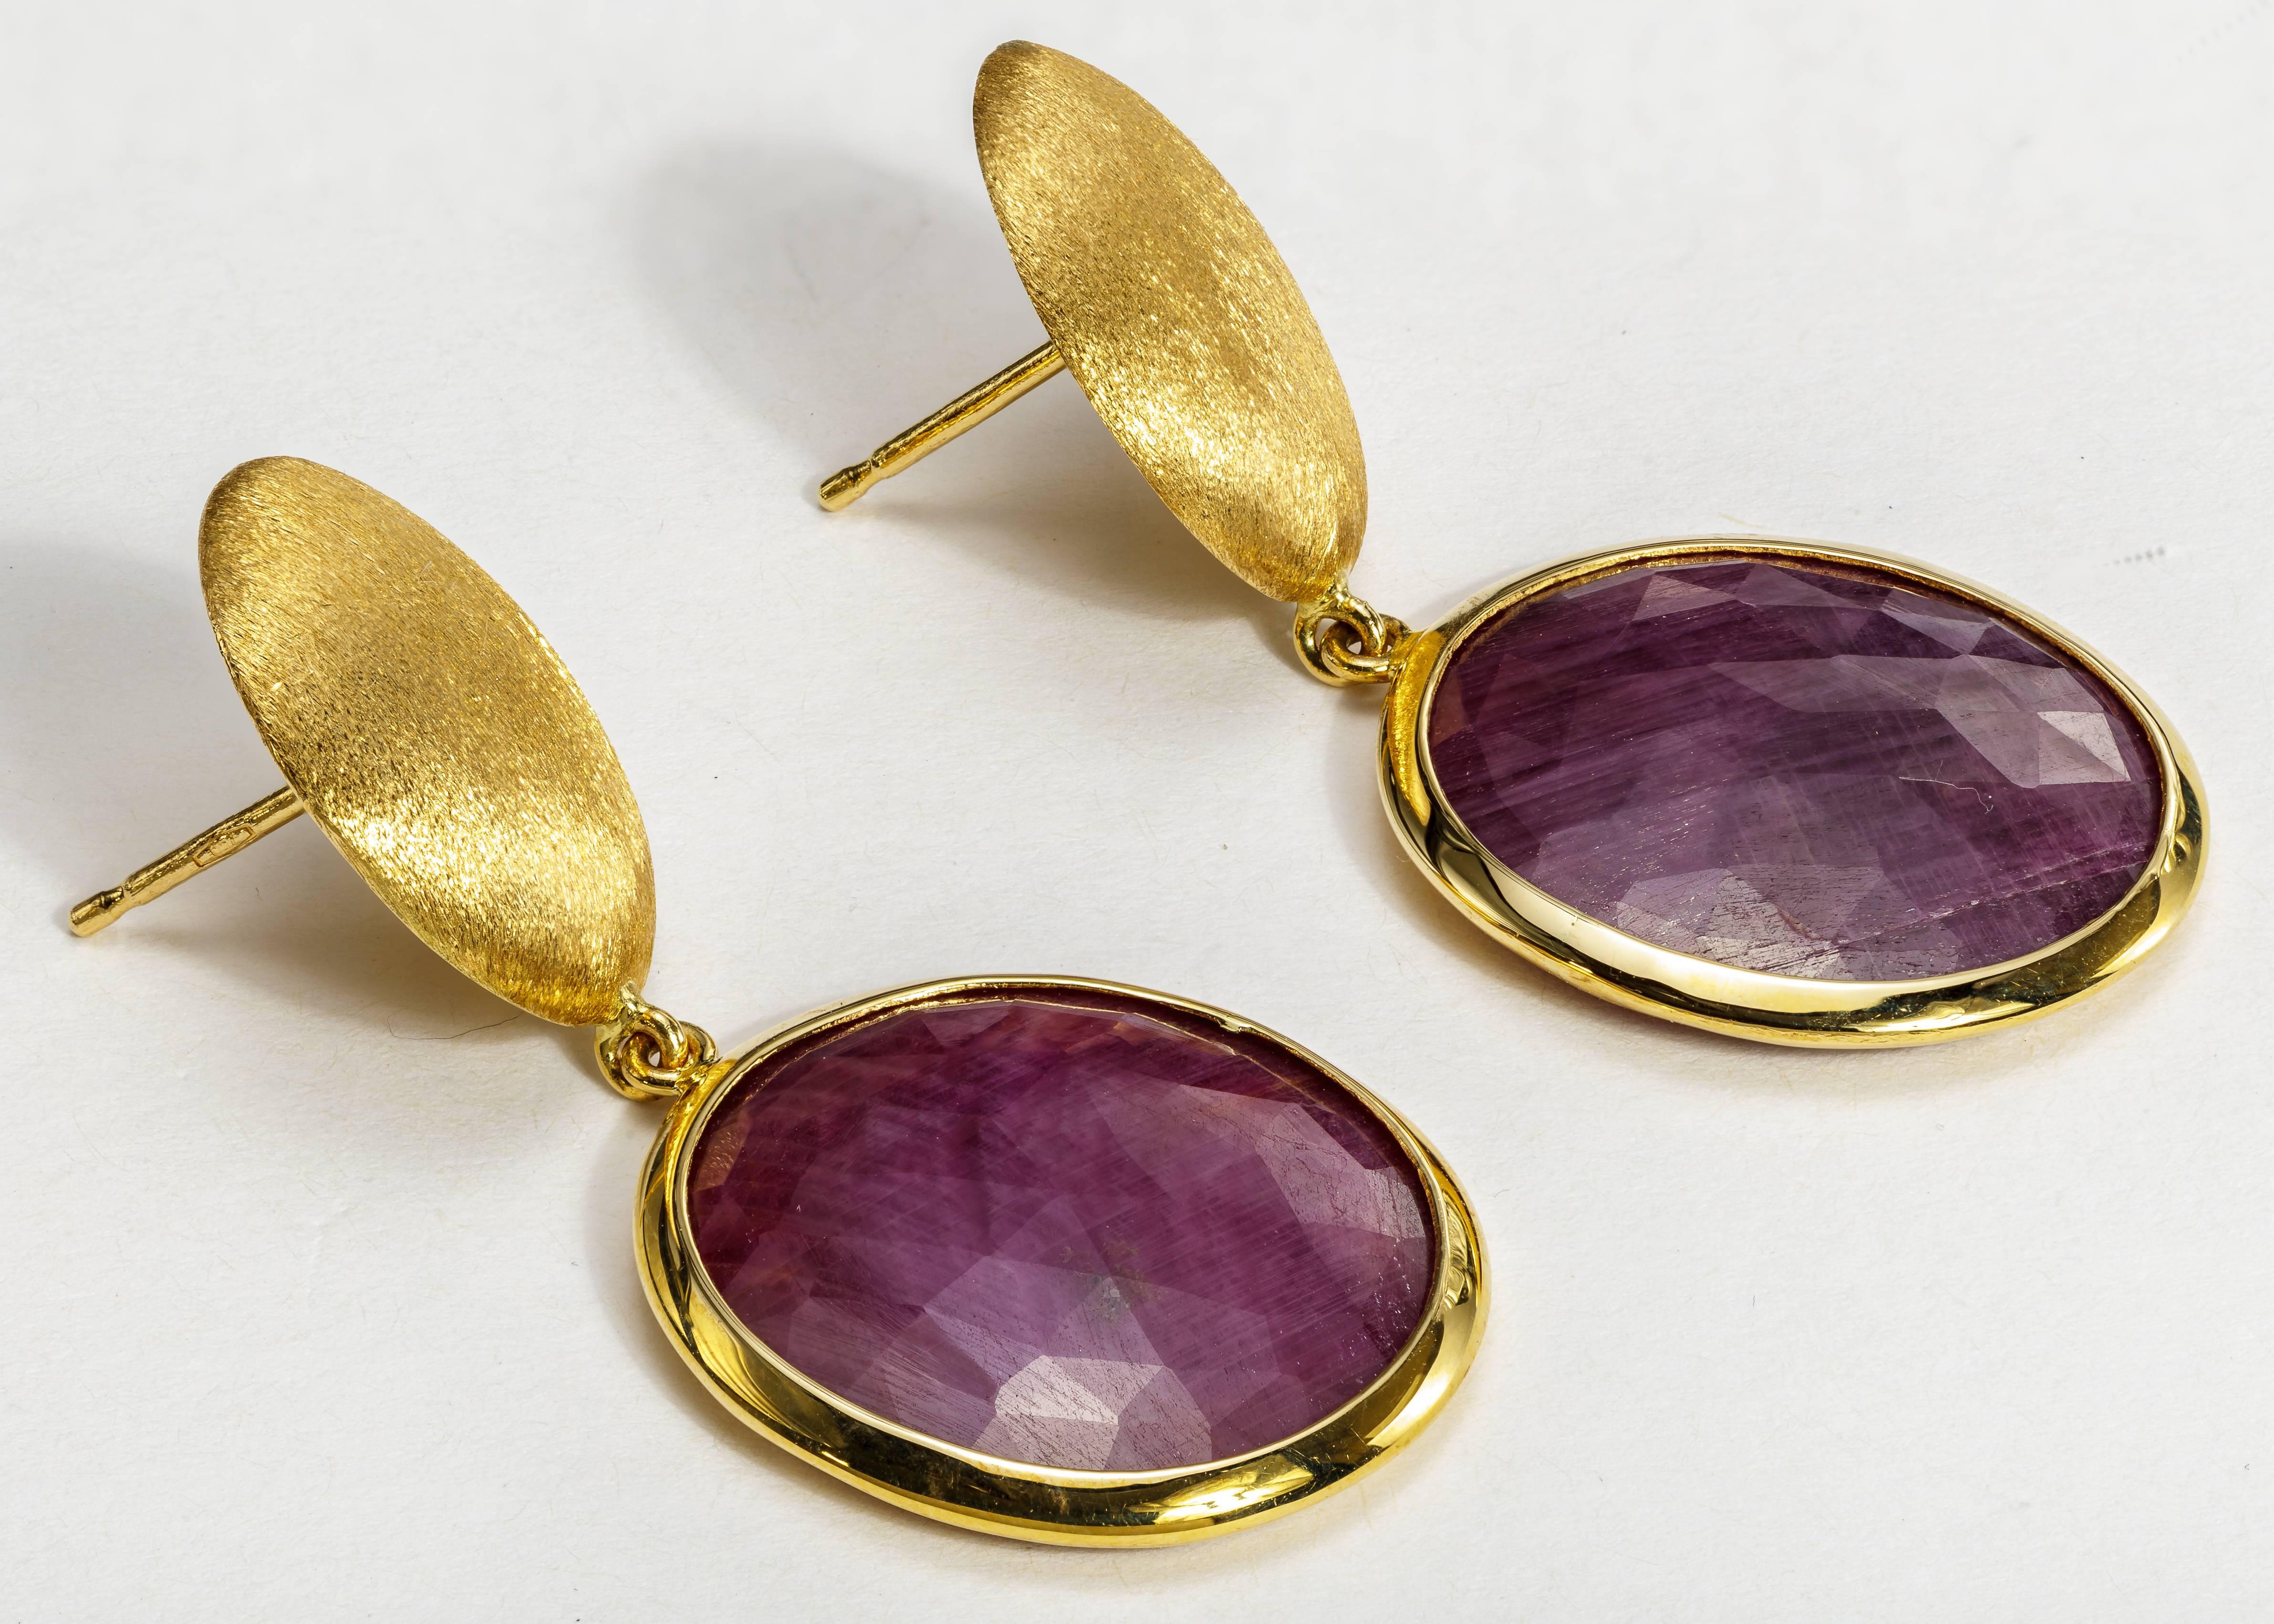 This pair of Yvel earrings features reddish purple sapphires set in satin brushed 18k yellow gold.